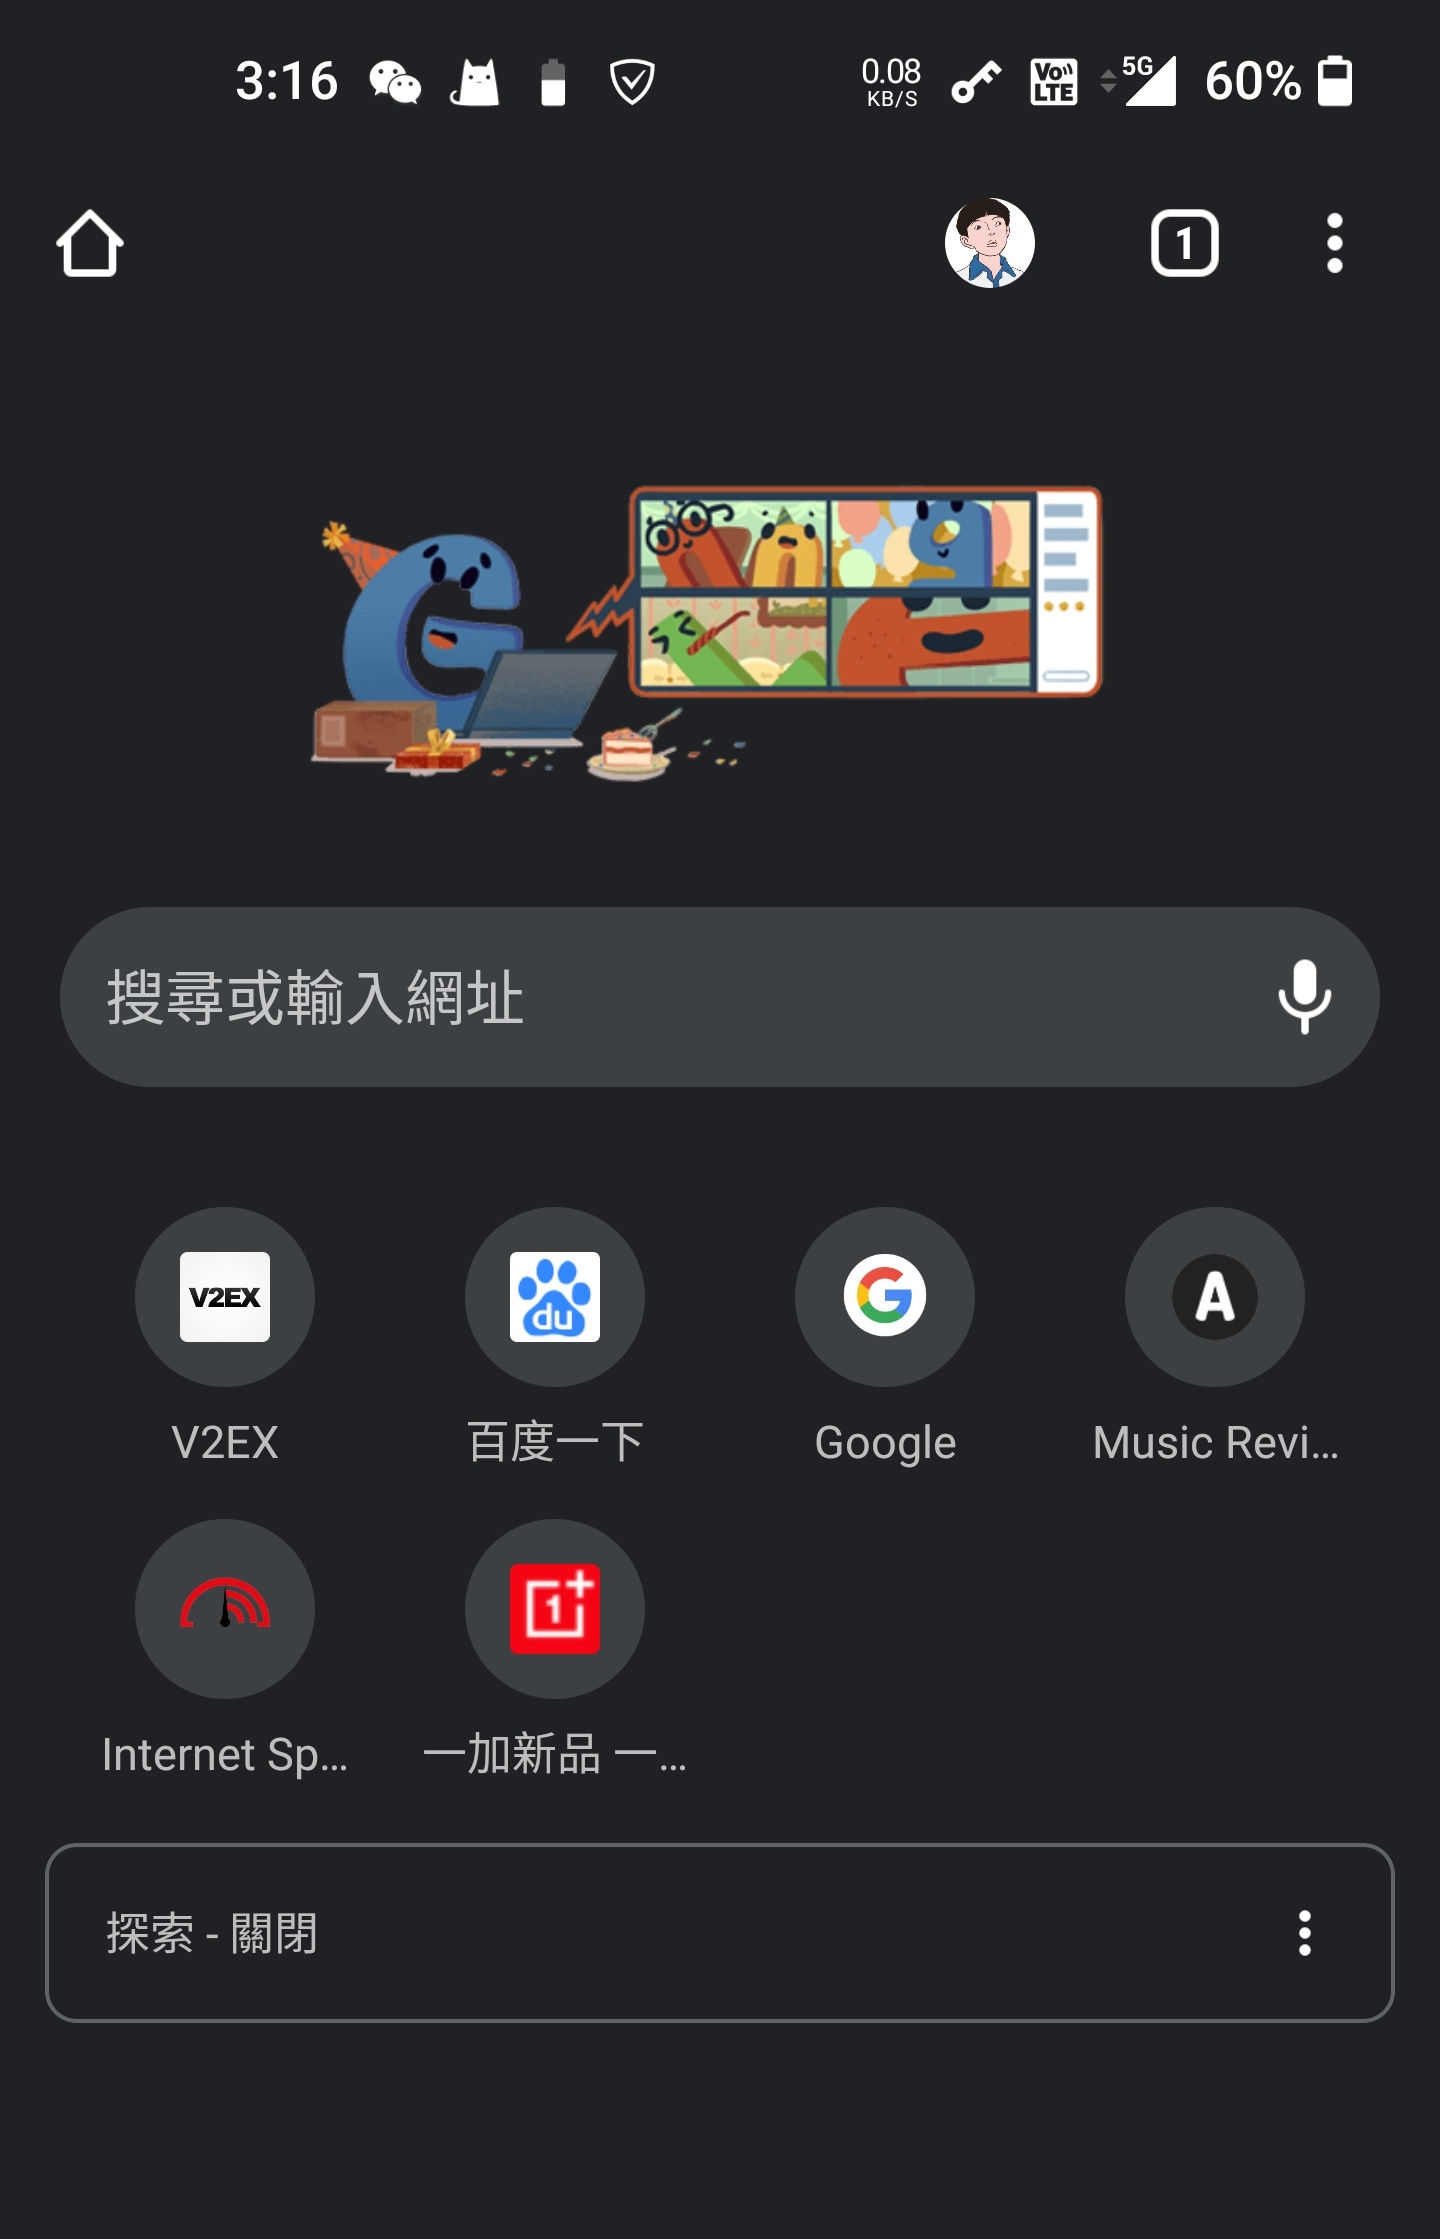 Chrome for Android 搜索栏历史记录